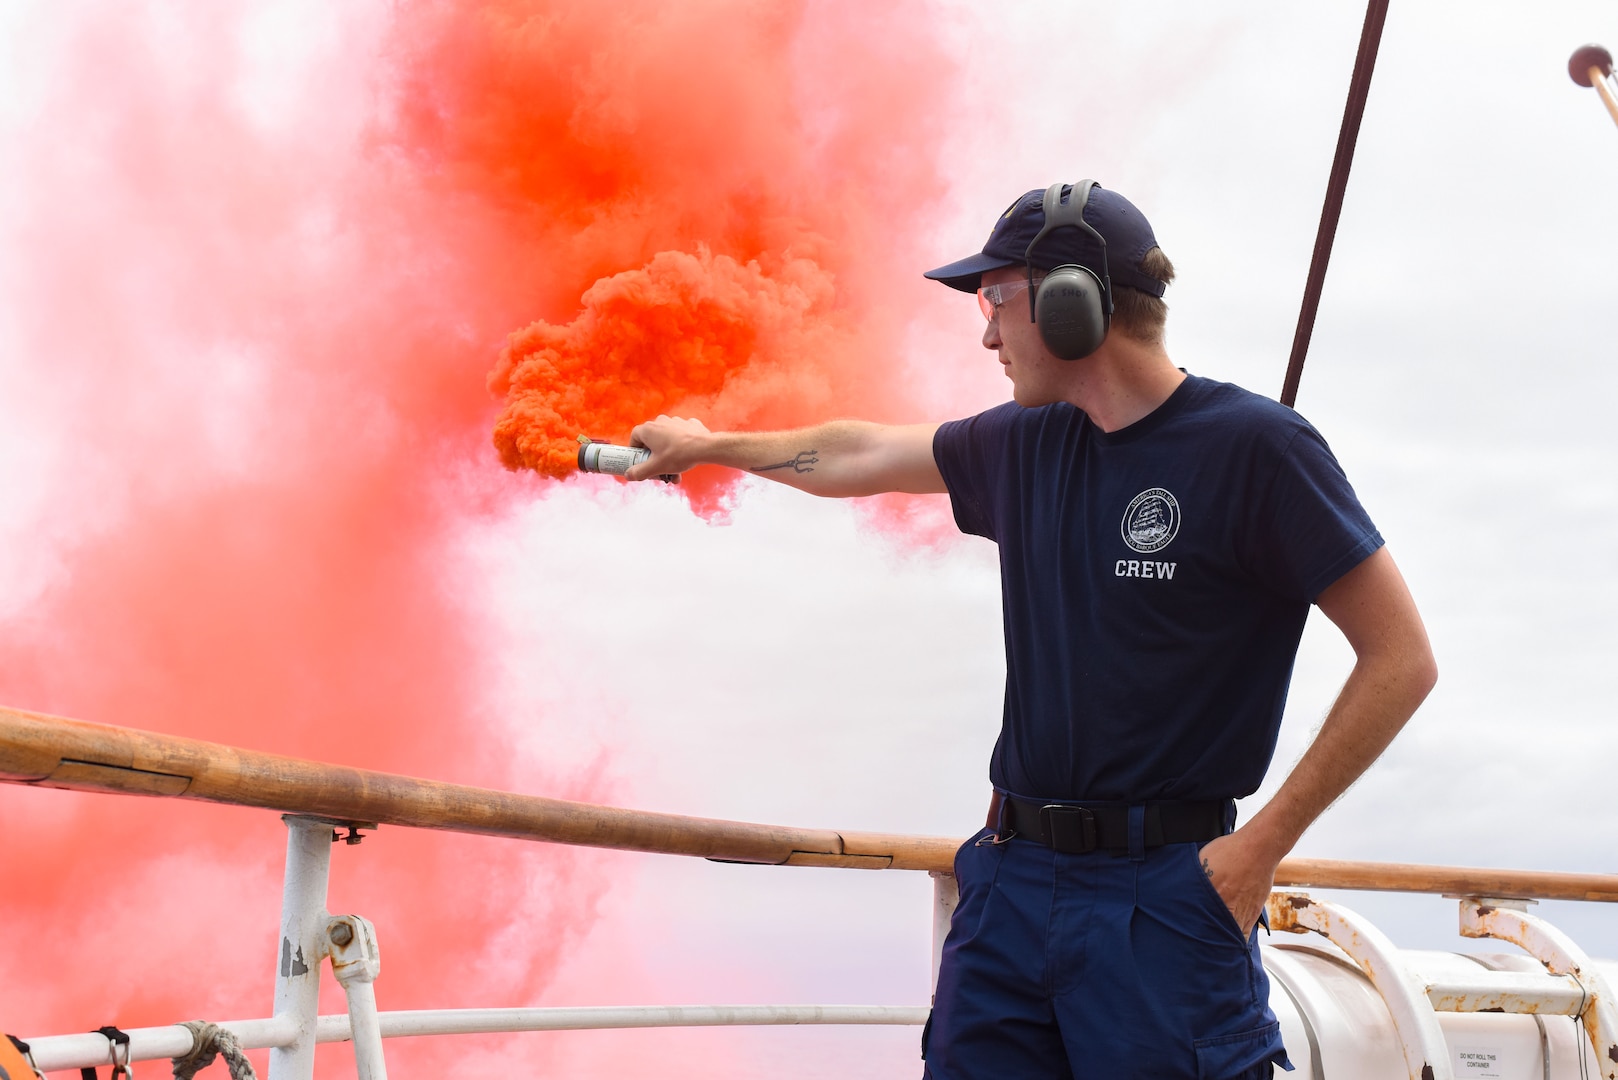 U.S. Coast Guard Petty Officer 3rd Class Benjamin Thomas, a boatswain’s mate aboard USCGC Eagle (WIX 327), test releases a smoke flare on the stern of USCGC Eagle (WIX 327), July 5, 2023, while underway in the Atlantic Ocean. Eagle is a tall ship used as a training platform for future Coast Guard officers. (U.S. Coast Guard photo by Petty Officer 3rd Class Carmen Caver)